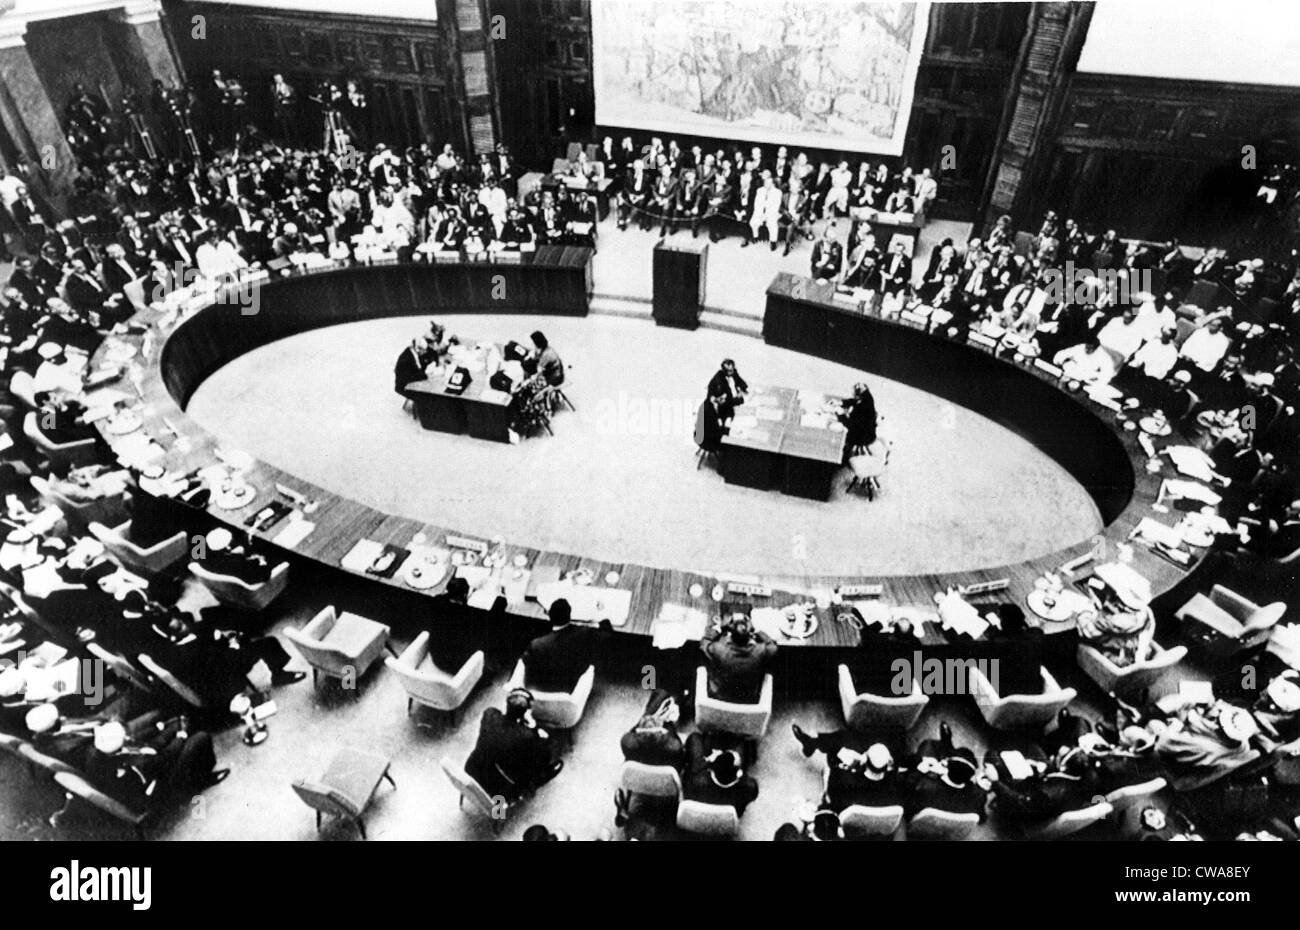 OPENING OF NEUTRALS' CONFERENCE, BELGRADE  YUGOSLAVIA: Overhead view of the conference of 24 unaligned nations in the Yugoslav Stock Photo